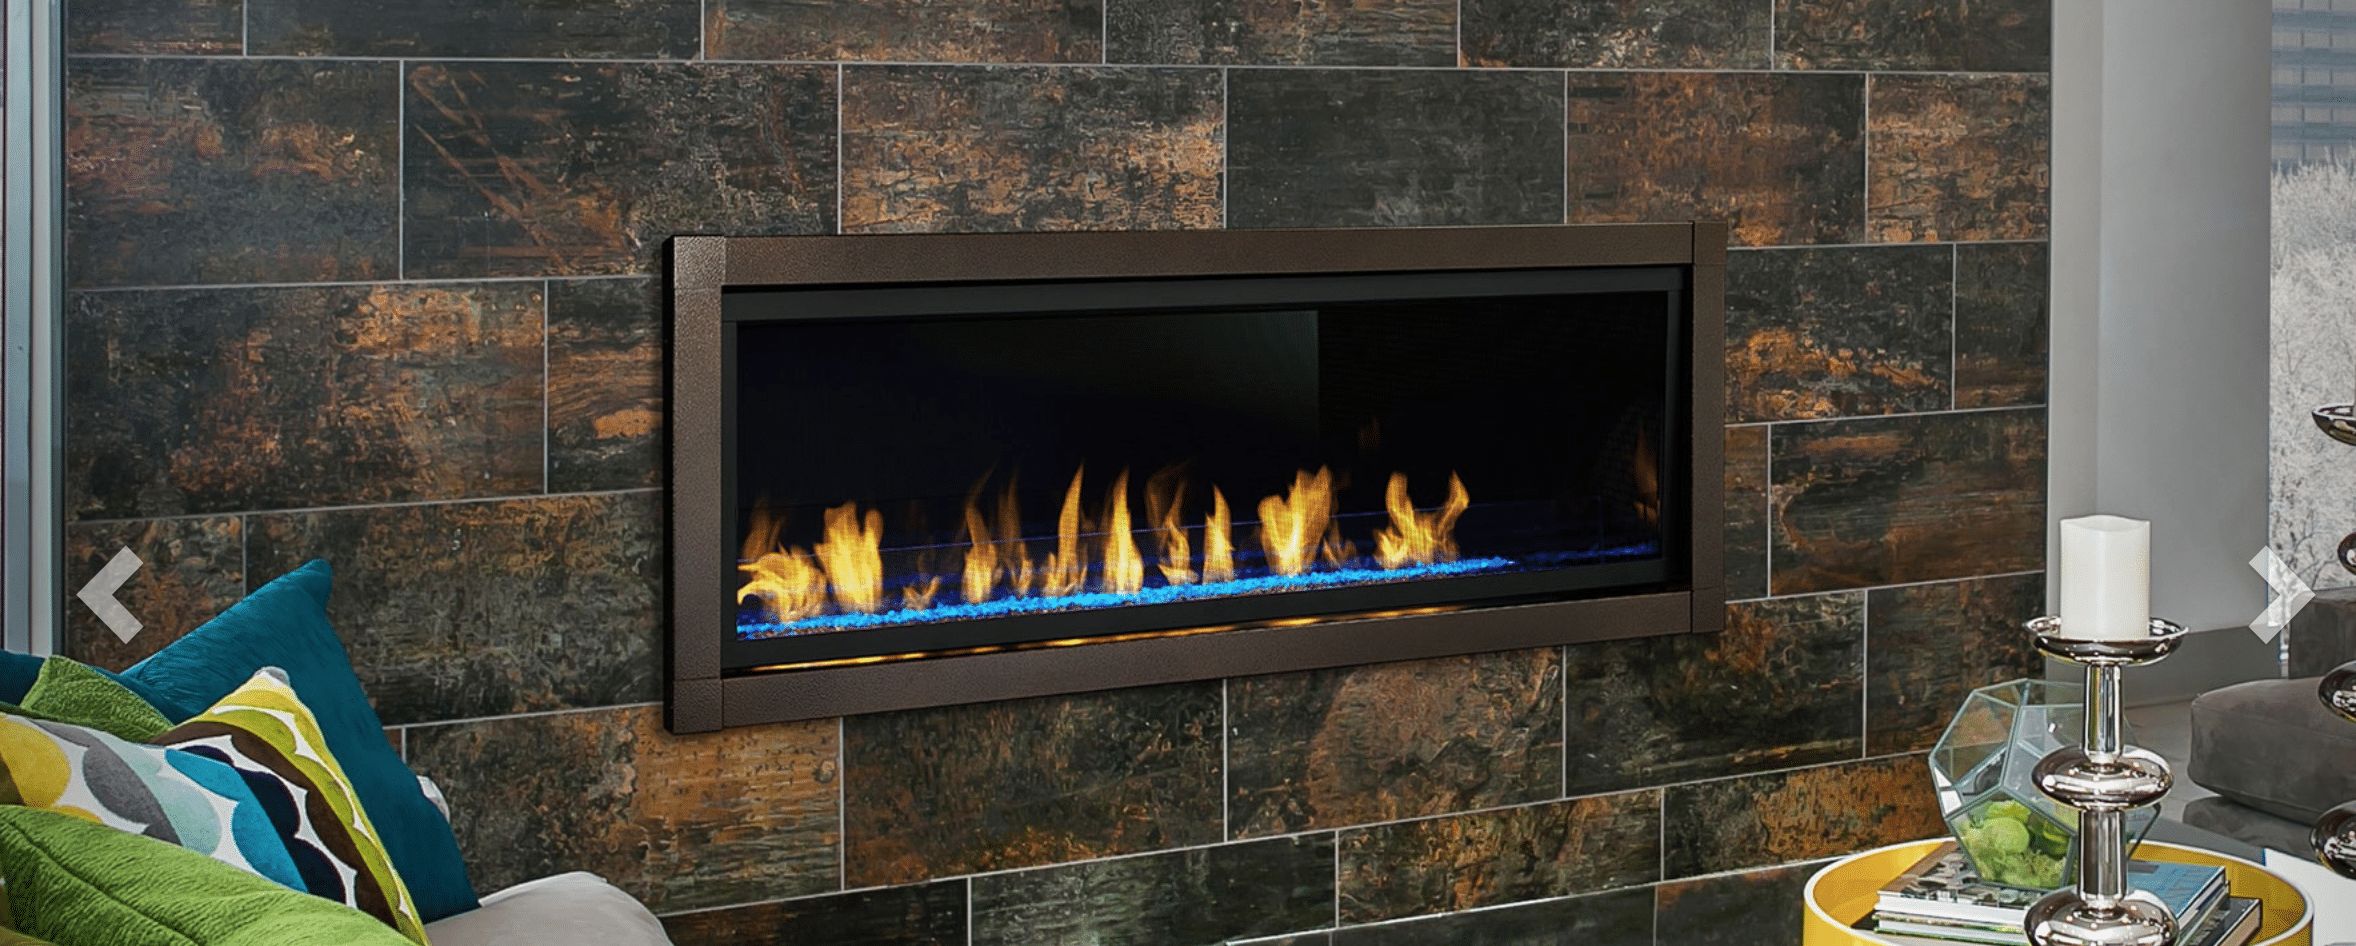 upscale fireplace with a stone wall surround